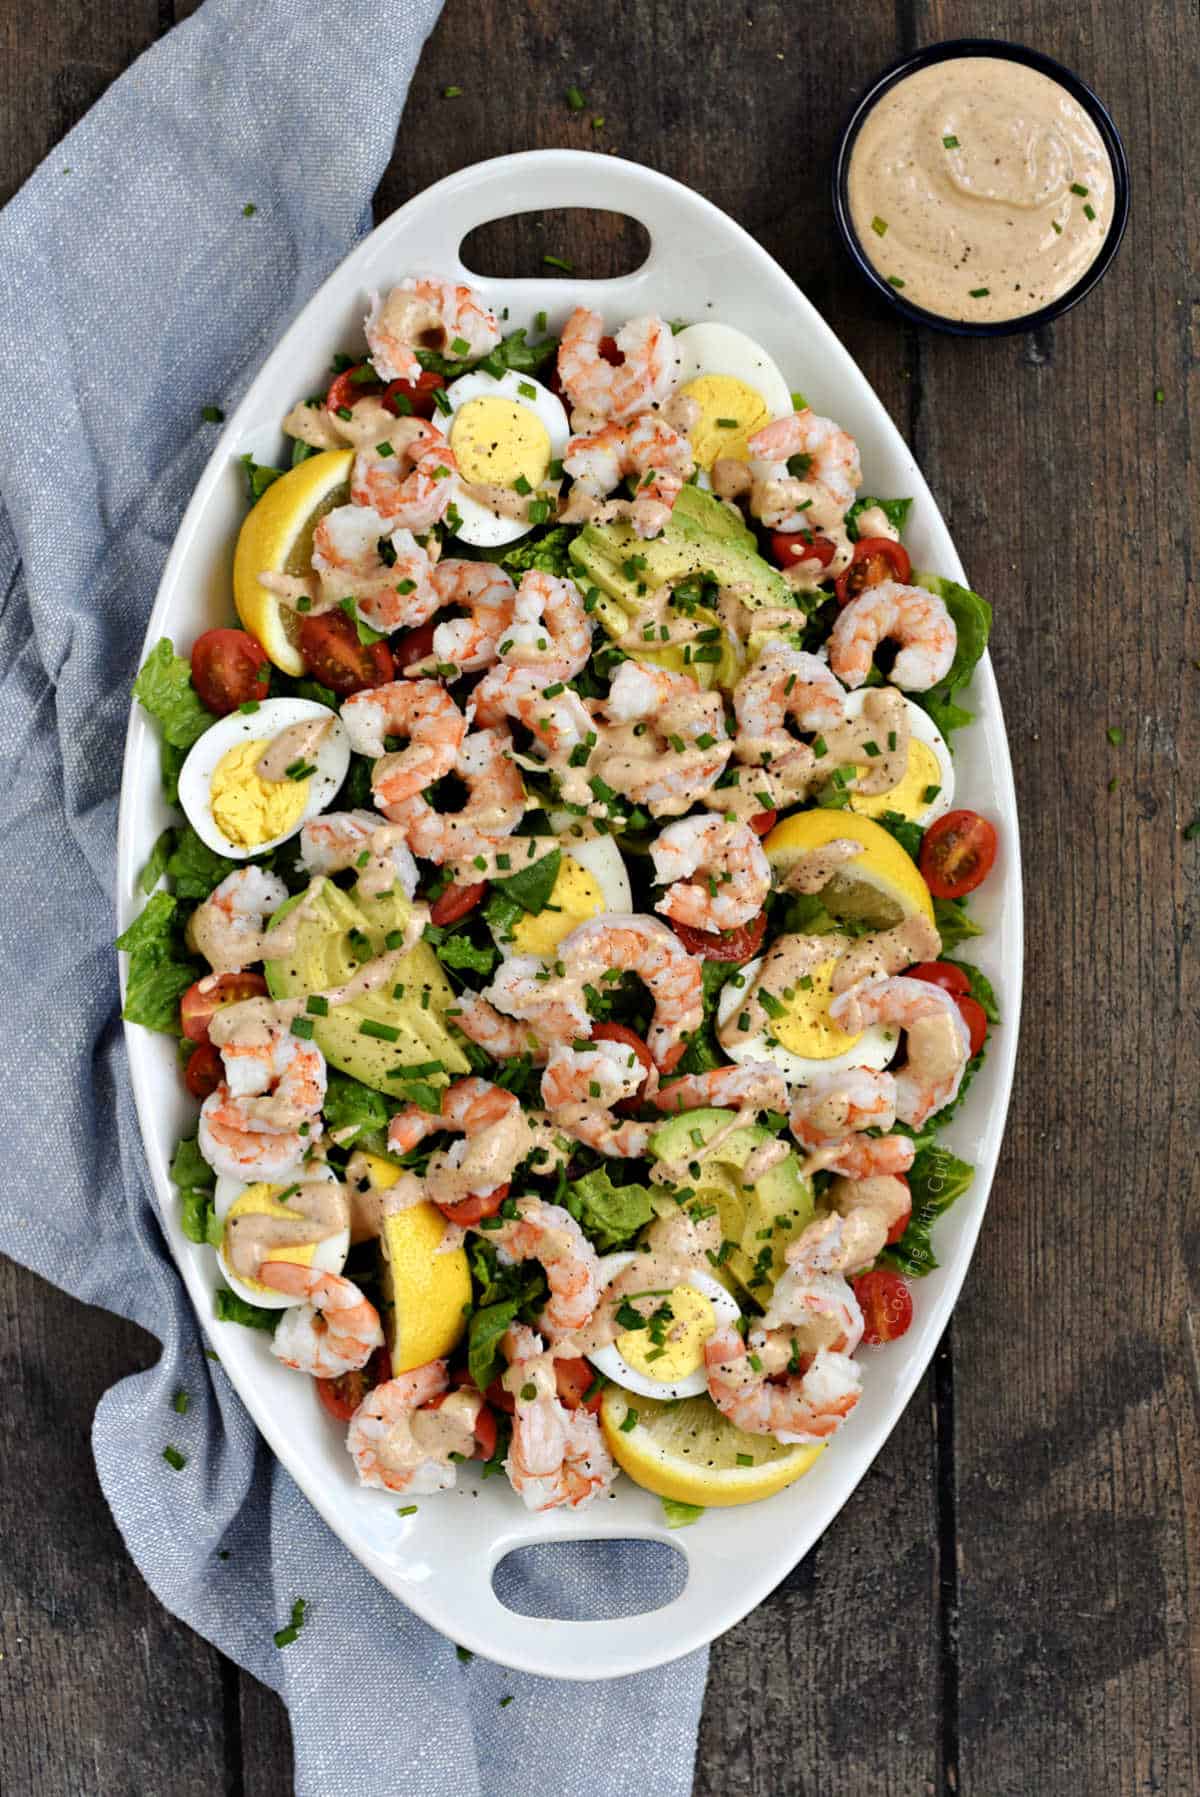 Shrimp salad with hard-boiled eggs and avocado on a platter.